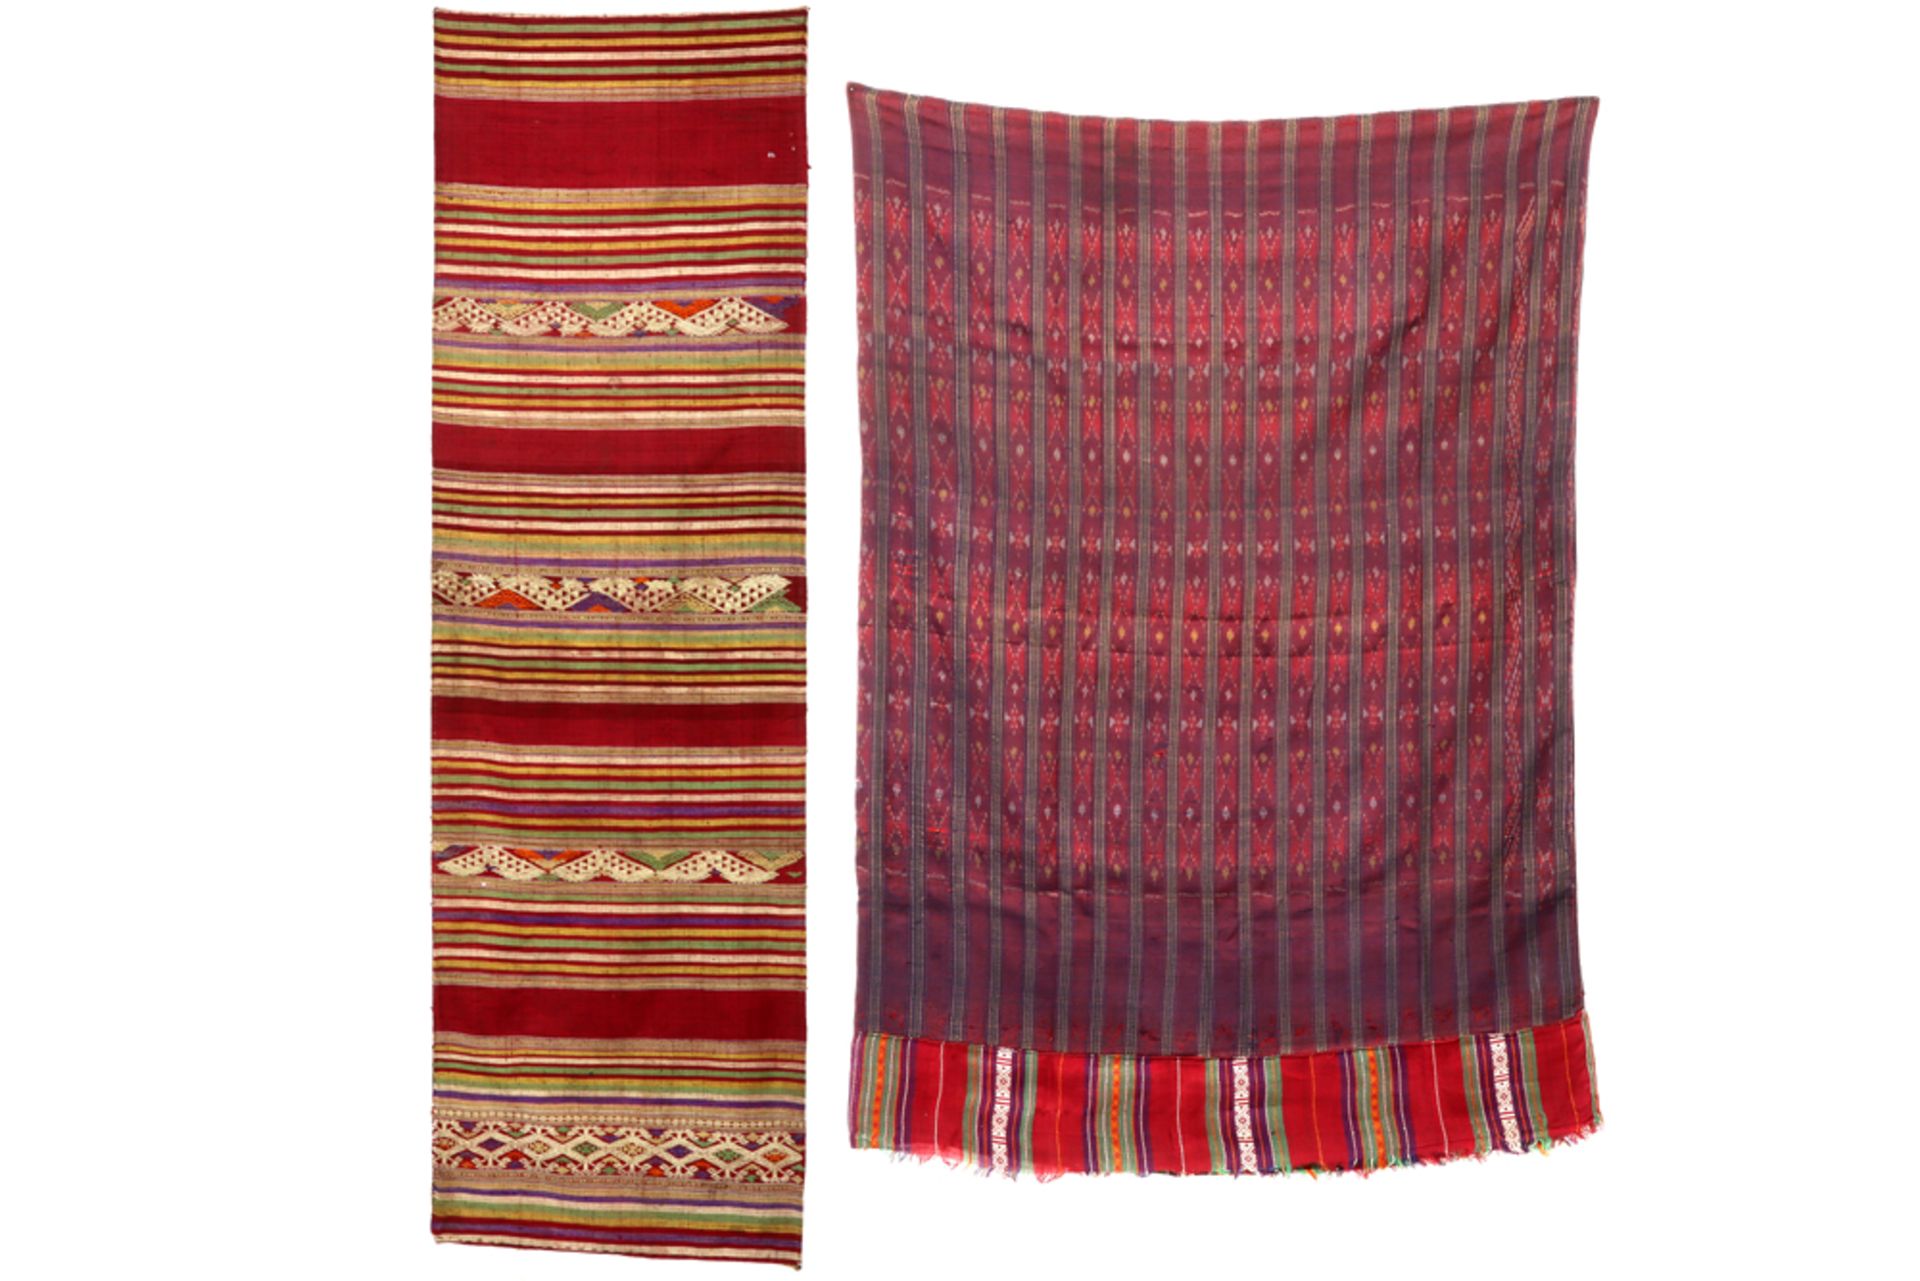 two pieces of ethnic vintage textiles from Laos in hand-woven silk with inlaid fabrics||Twee stuks